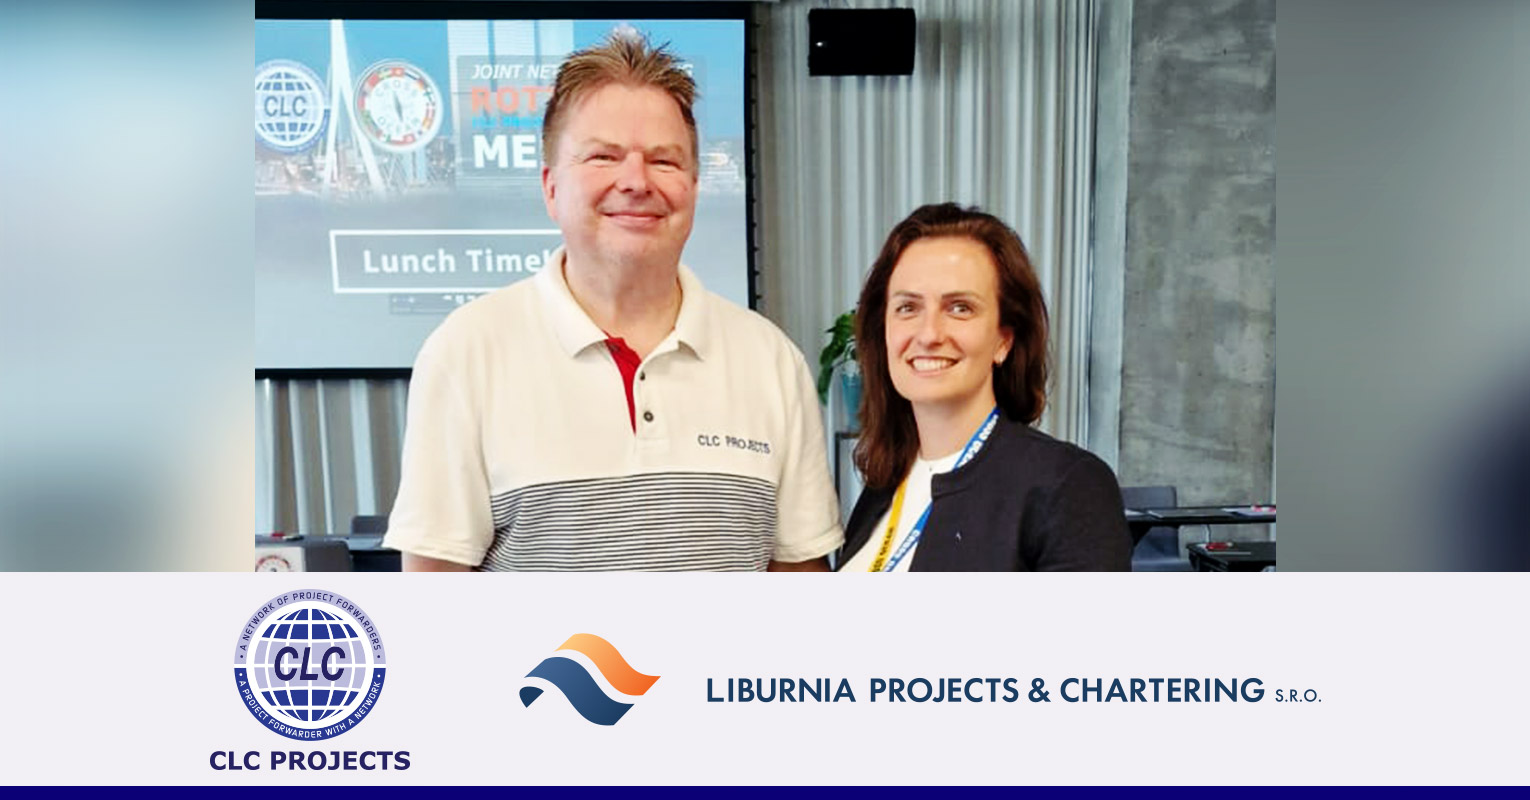 Petronela Galambosova of Liburnia Projects & Chartering and CLC Projects Chairman at joint network meeting in Rotterdam